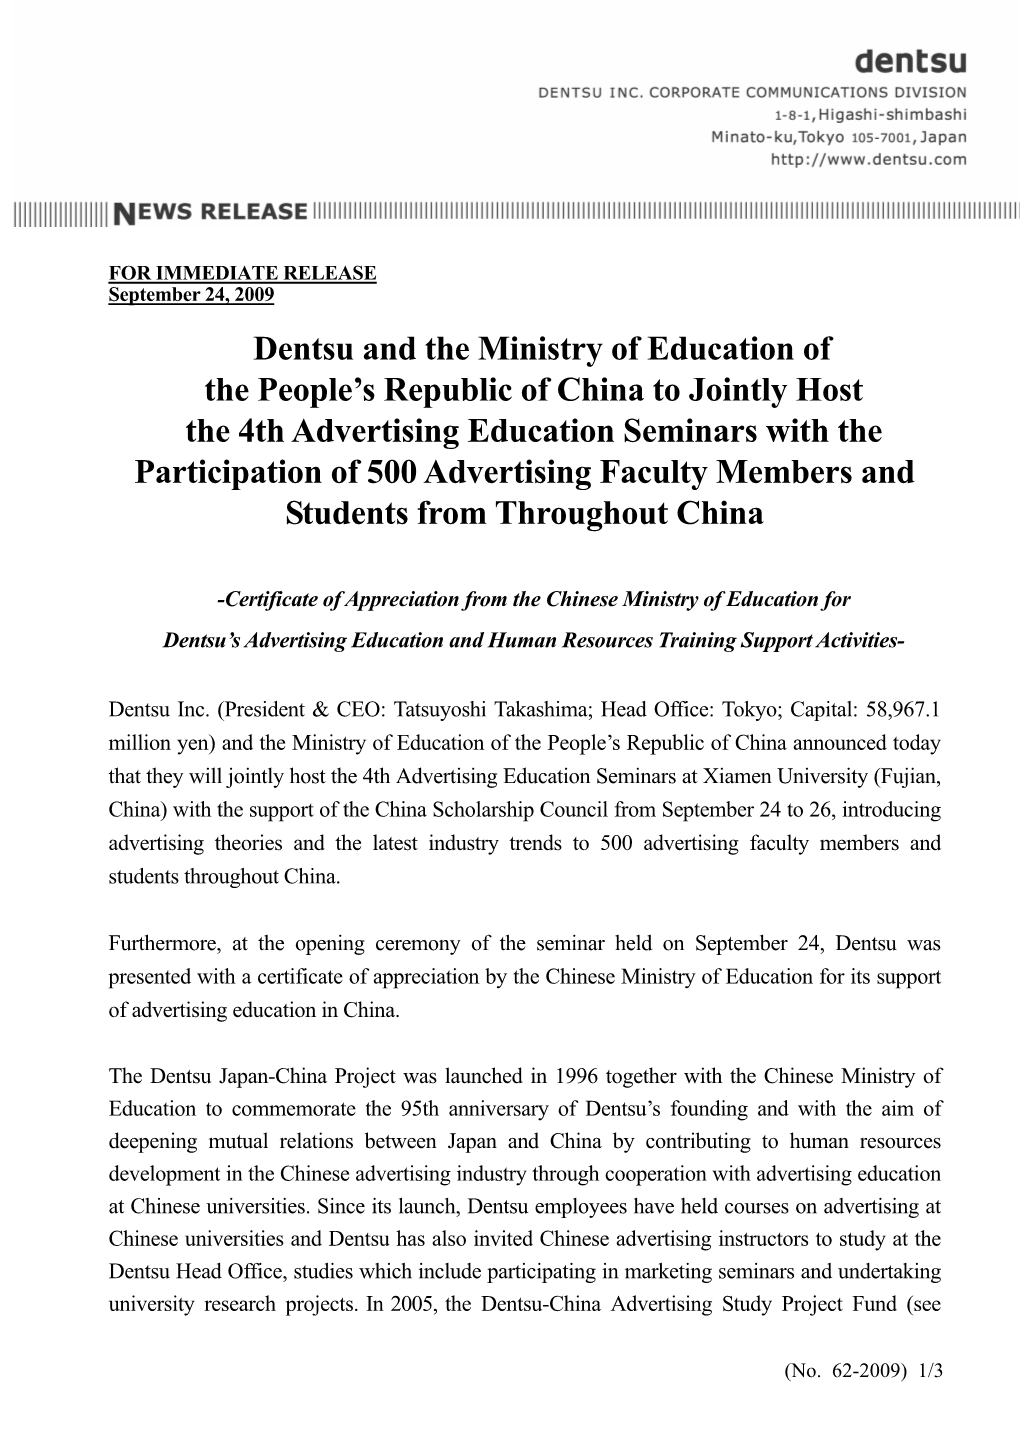 Dentsu and the Ministry of Education of the People's Republic of China To